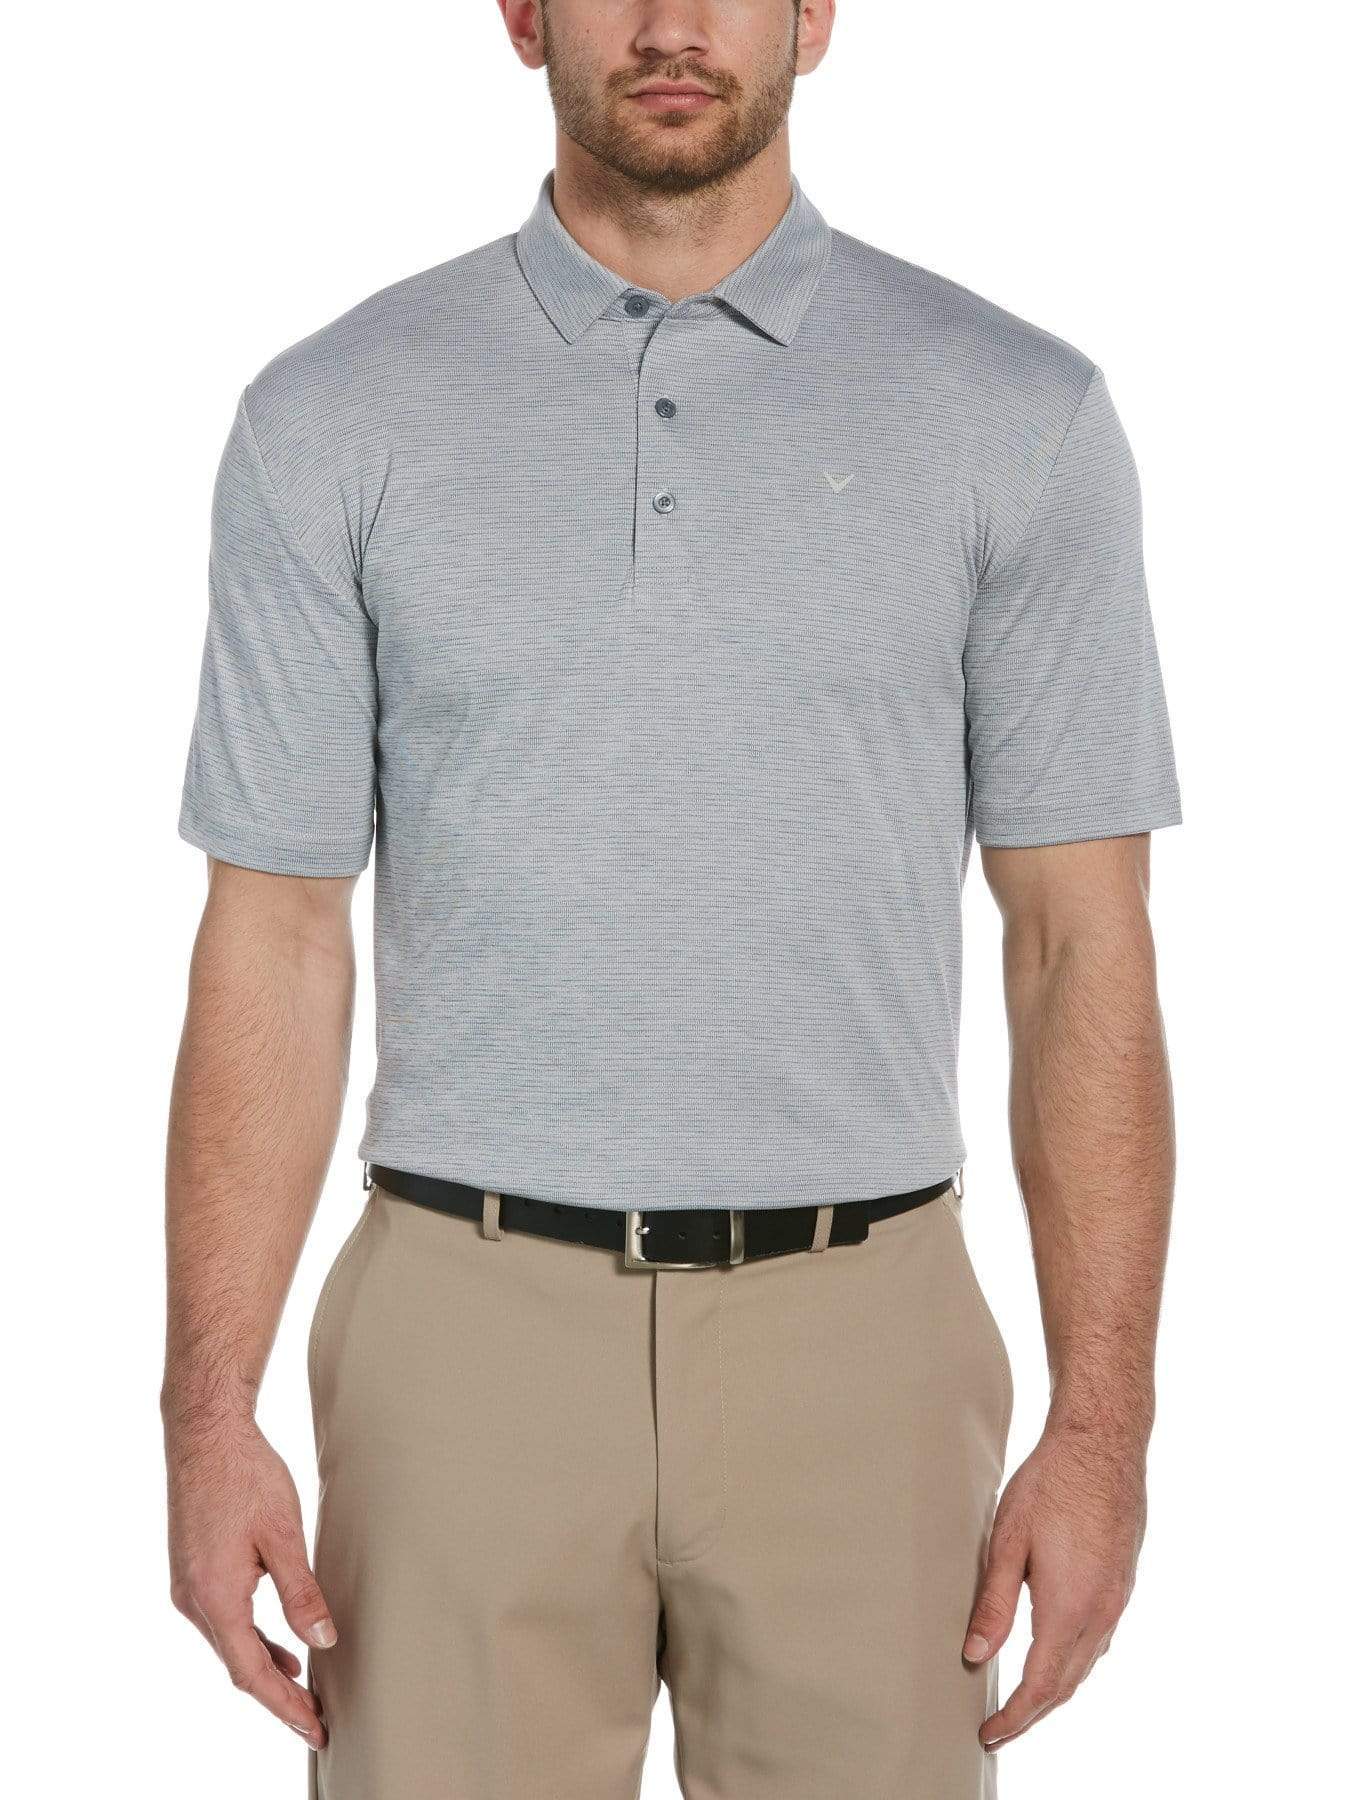 Callaway Apparel Mens Big & Tall Solid Textured Polo Shirt, Size 2X, Tradewinds Heather Gray, 100% Polyester | Golf Apparel Shop